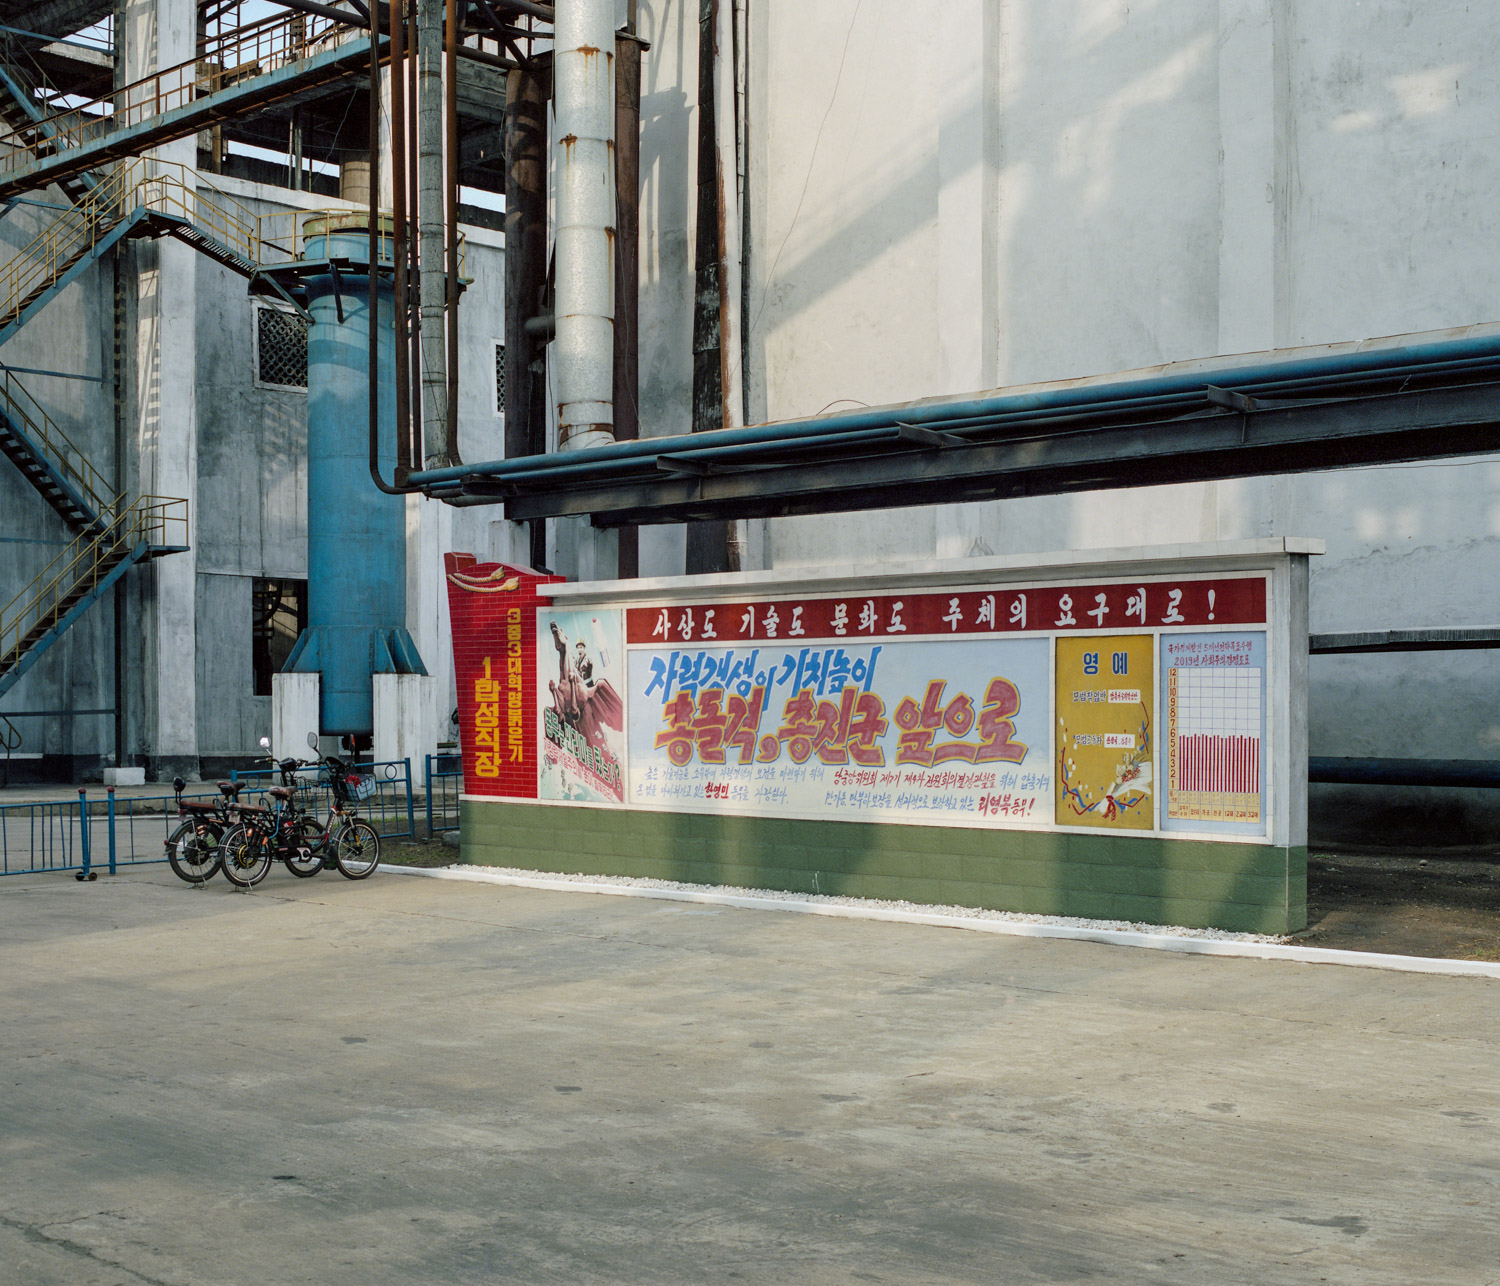  Propaganda Poster in a chemical factory in Hamhung. 